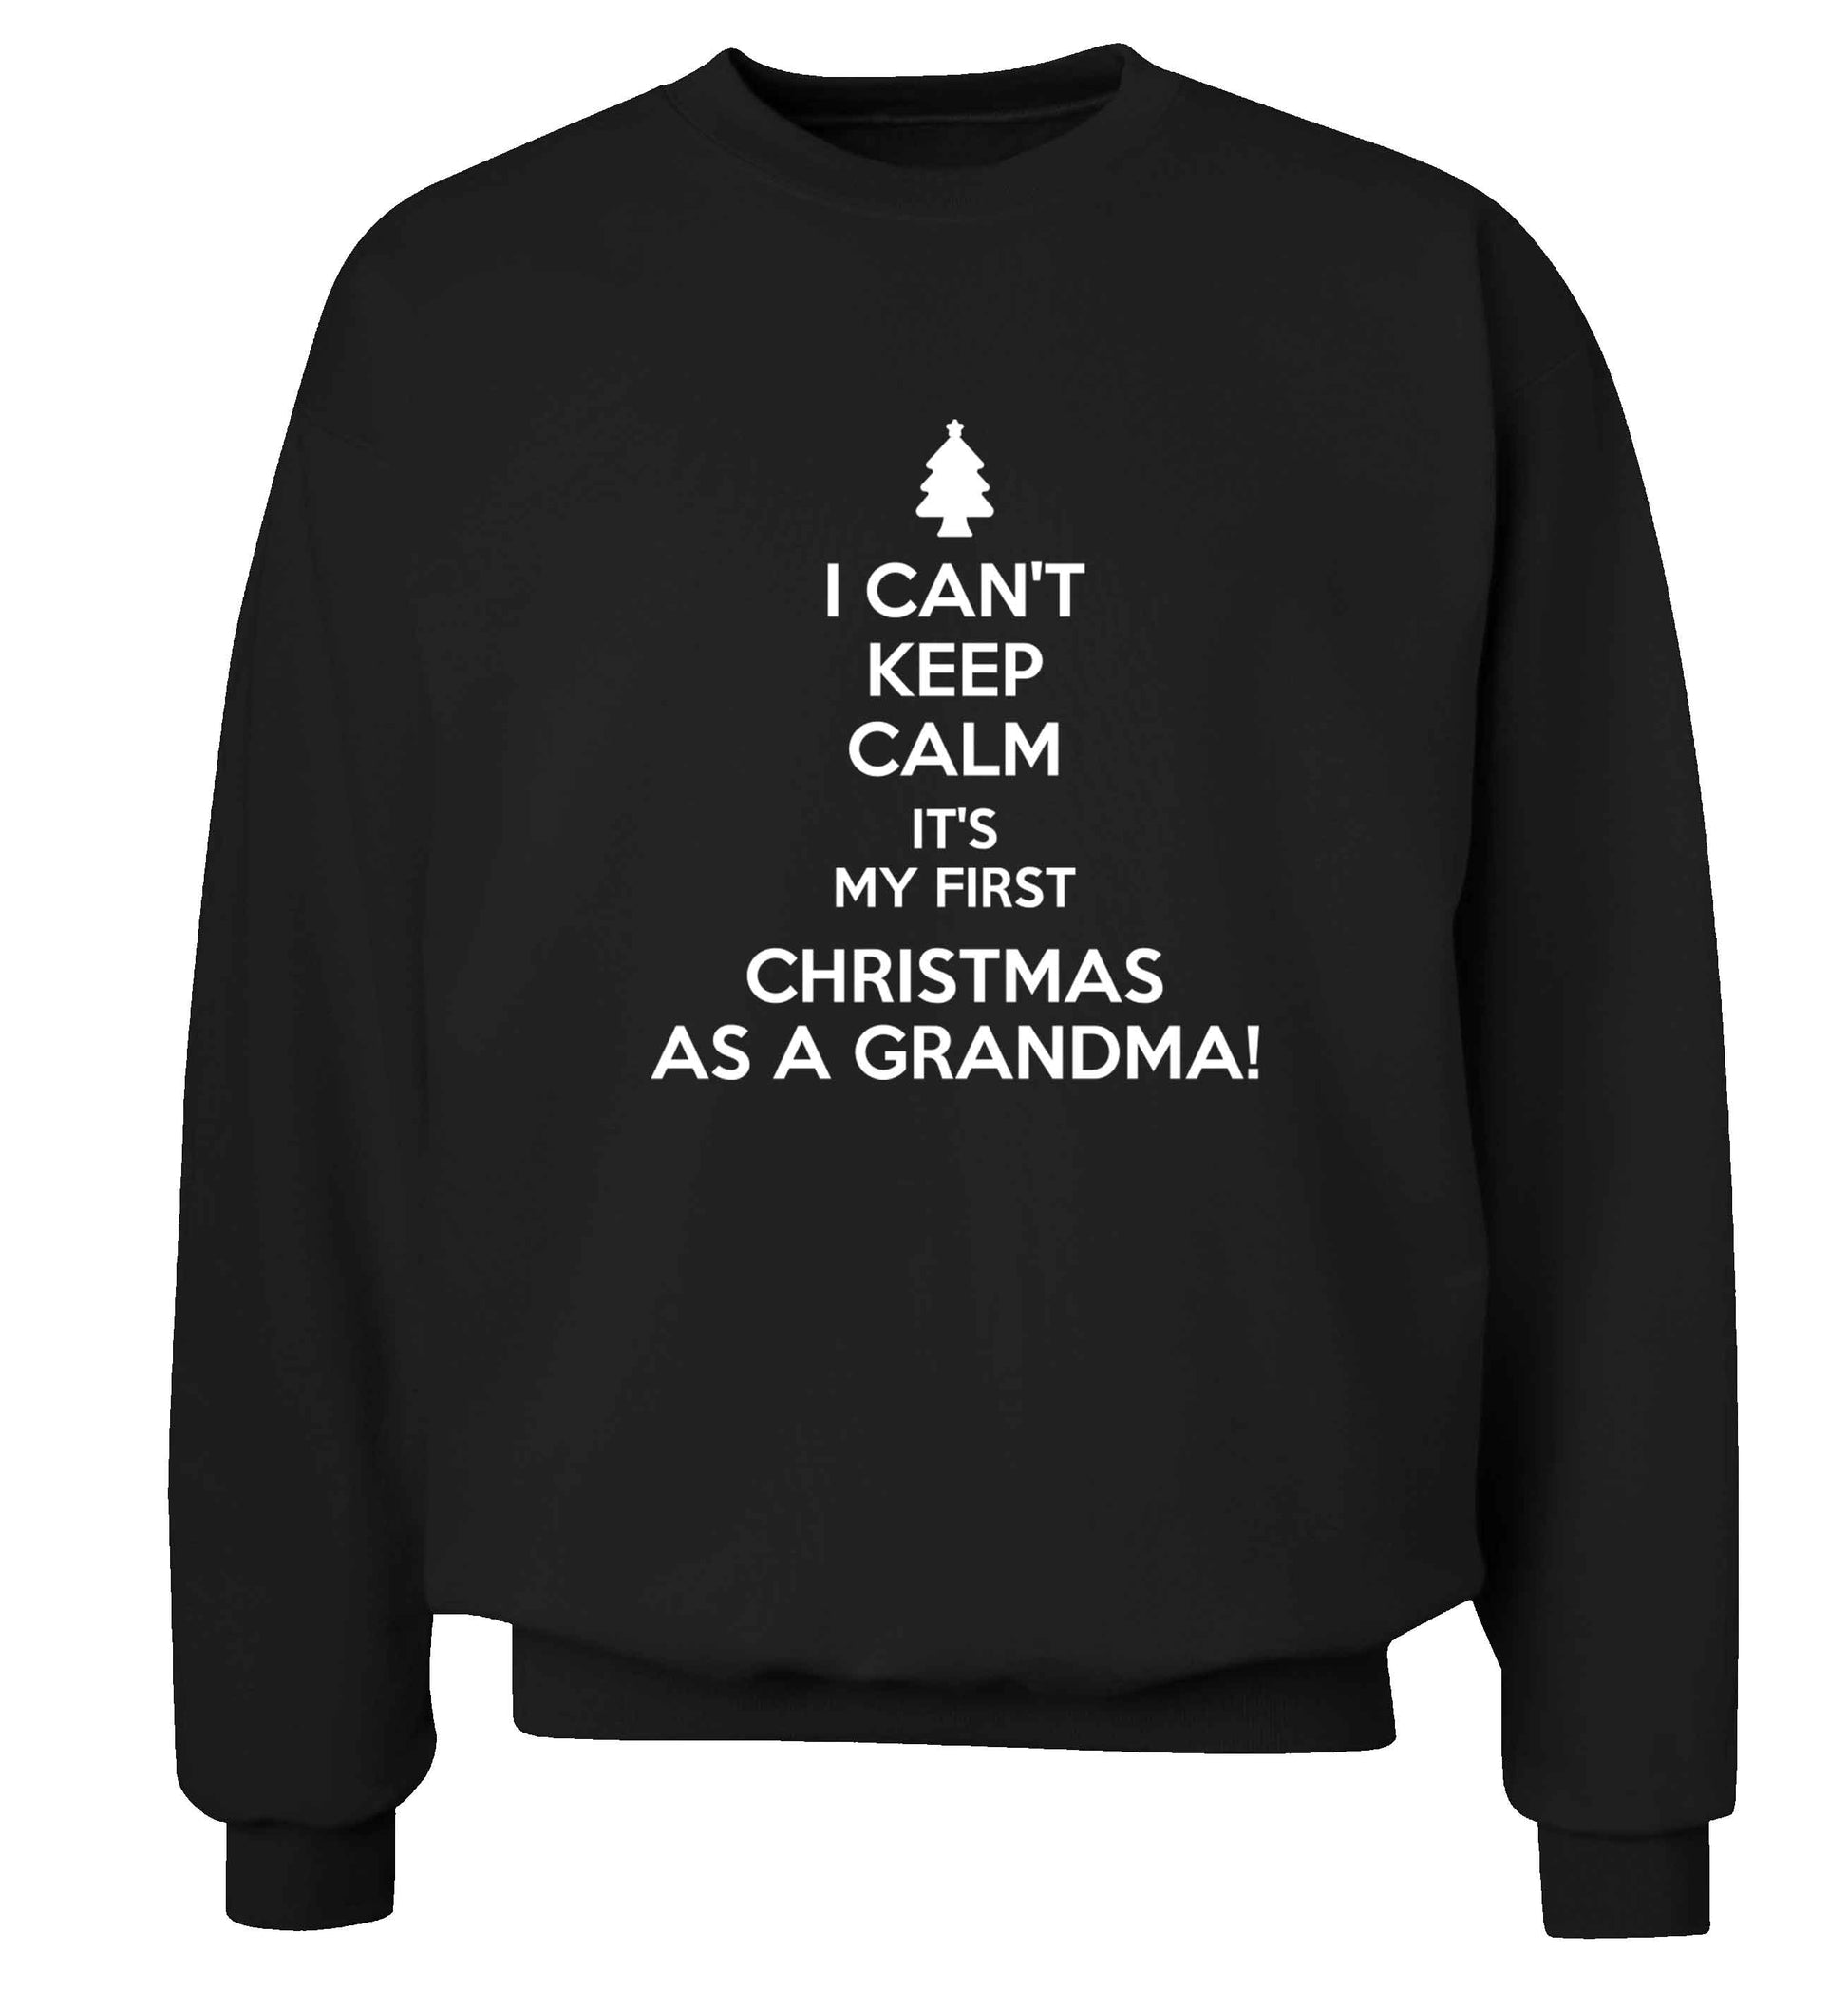 I can't keep calm it's my first Christmas as a grandma! Adult's unisex black Sweater 2XL